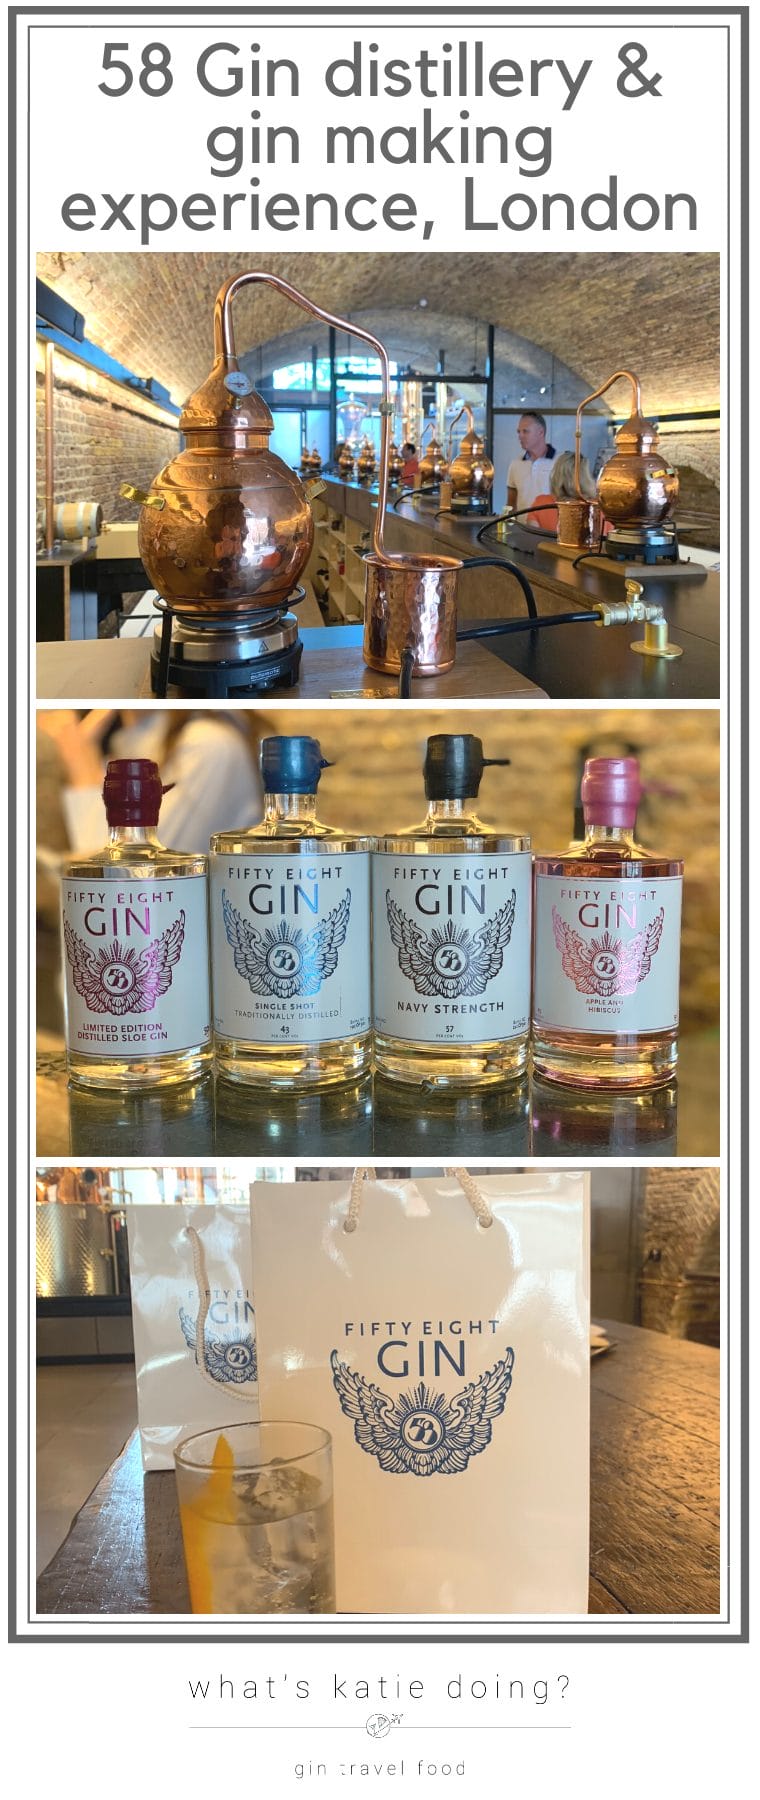 58 gin distillery and gin making experience